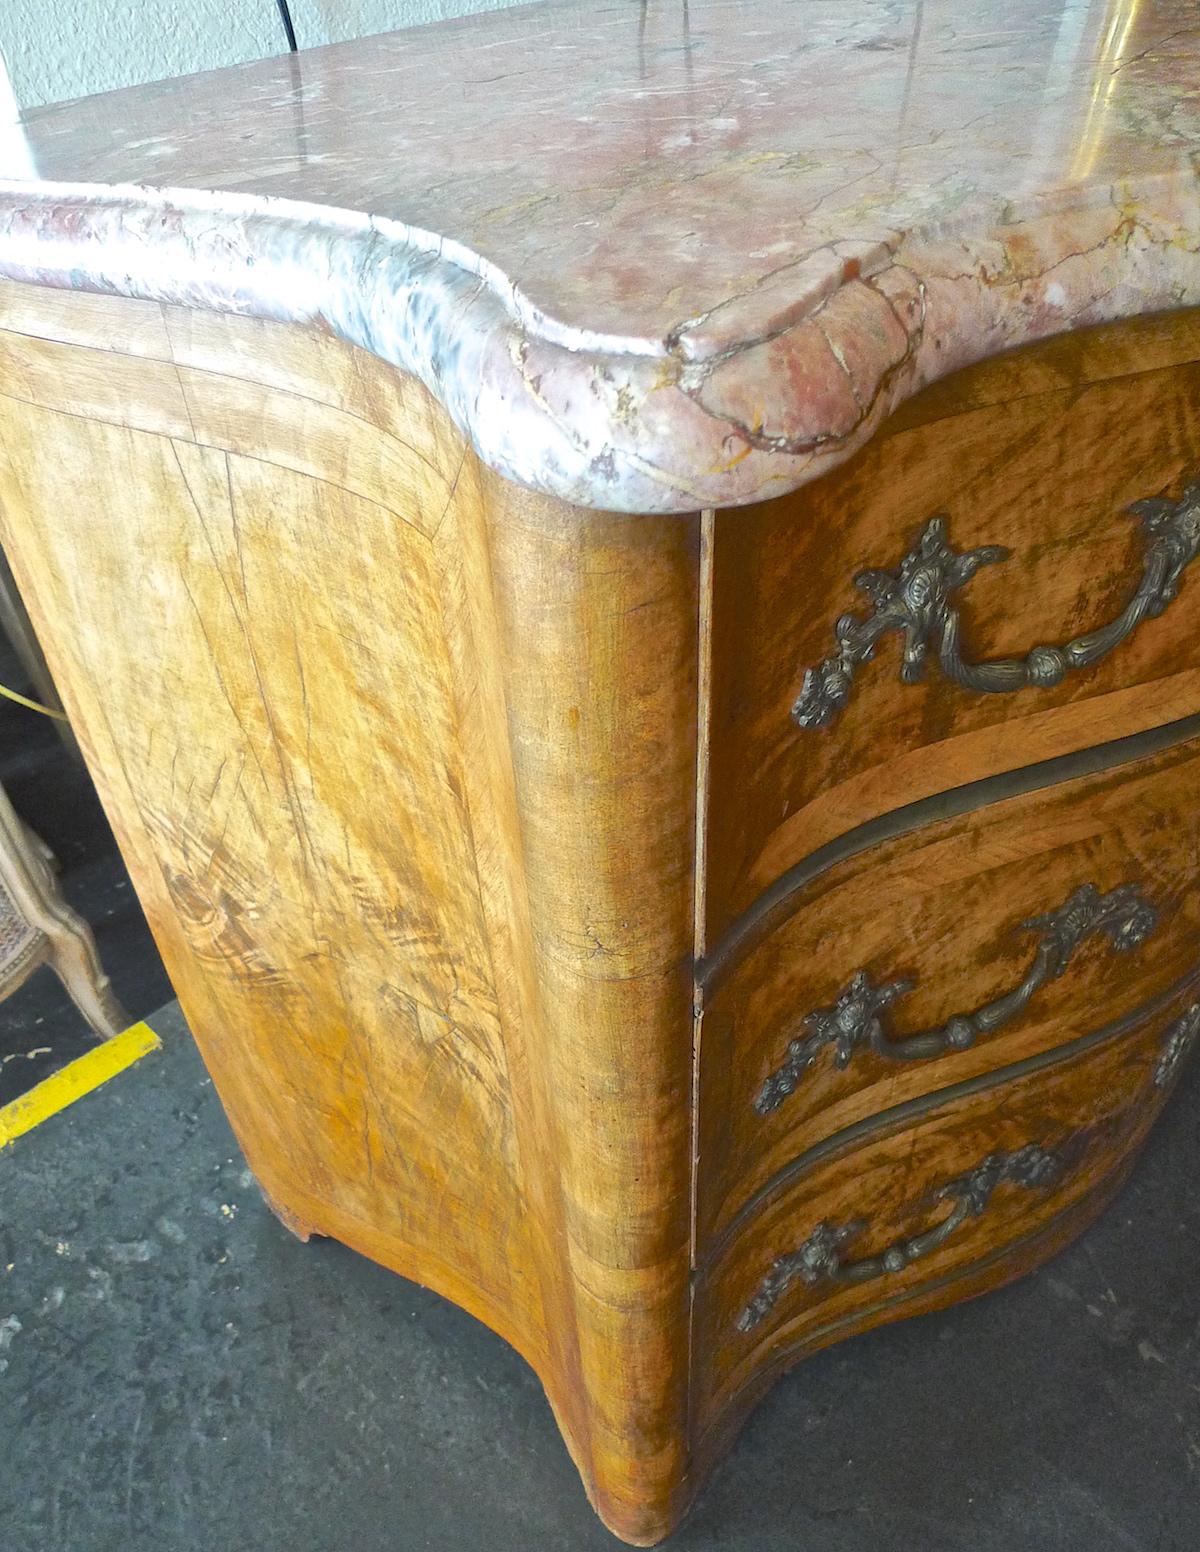 Veneer French 19th Century Bow-Fronted Burl Walnut Chest of Drawers with a Marble Top